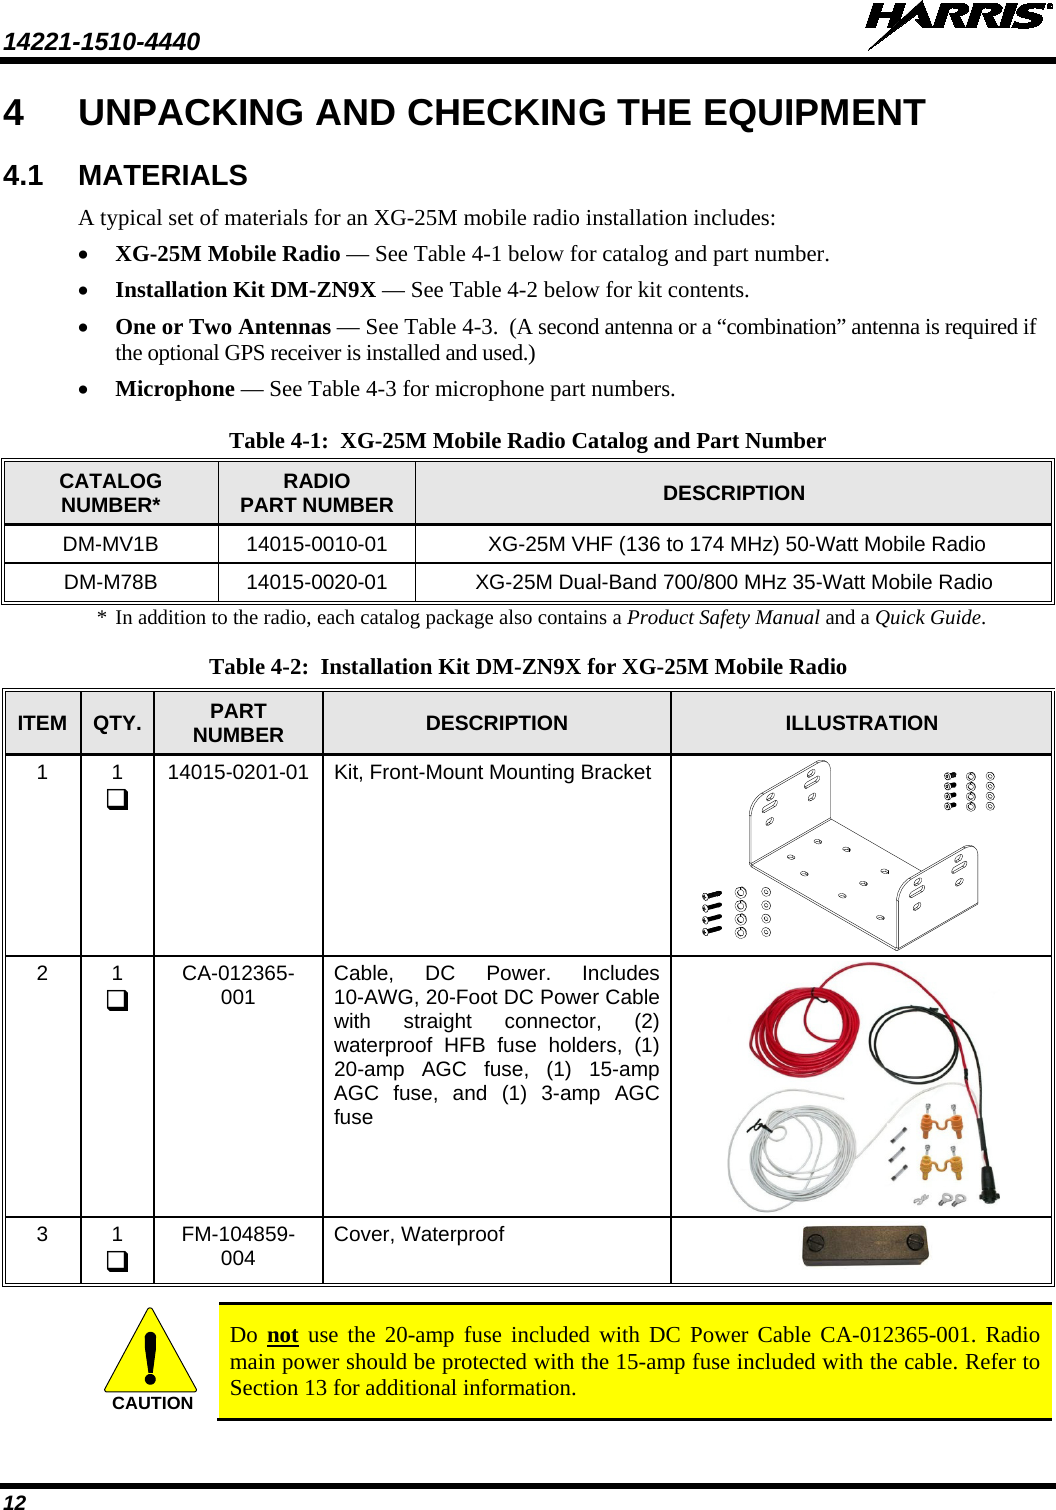 14221-1510-4440   12 4  UNPACKING AND CHECKING THE EQUIPMENT 4.1 MATERIALS A typical set of materials for an XG-25M mobile radio installation includes: • XG-25M Mobile Radio — See Table 4-1 below for catalog and part number. • Installation Kit DM-ZN9X — See Table 4-2 below for kit contents. • One or Two Antennas — See Table 4-3.  (A second antenna or a “combination” antenna is required if the optional GPS receiver is installed and used.) • Microphone — See Table 4-3 for microphone part numbers. Table 4-1:  XG-25M Mobile Radio Catalog and Part Number CATALOG NUMBER*  RADIO PART NUMBER DESCRIPTION DM-MV1B 14015-0010-01   XG-25M VHF (136 to 174 MHz) 50-Watt Mobile Radio DM-M78B 14015-0020-01 XG-25M Dual-Band 700/800 MHz 35-Watt Mobile Radio * In addition to the radio, each catalog package also contains a Product Safety Manual and a Quick Guide.  Table 4-2:  Installation Kit DM-ZN9X for XG-25M Mobile Radio ITEM QTY. PART NUMBER DESCRIPTION  ILLUSTRATION 1  1  14015-0201-01 Kit, Front-Mount Mounting Bracket          2  1  CA-012365-001 Cable, DC Power. Includes 10-AWG, 20-Foot DC Power Cable with straight connector, (2) waterproof HFB fuse holders, (1) 20-amp AGC fuse,  (1) 15-amp AGC fuse,  and (1) 3-amp AGC fuse  3  1  FM-104859-004 Cover, Waterproof    Do not use the 20-amp fuse included with DC Power Cable CA-012365-001. Radio main power should be protected with the 15-amp fuse included with the cable. Refer to Section 13 for additional information. CAUTION